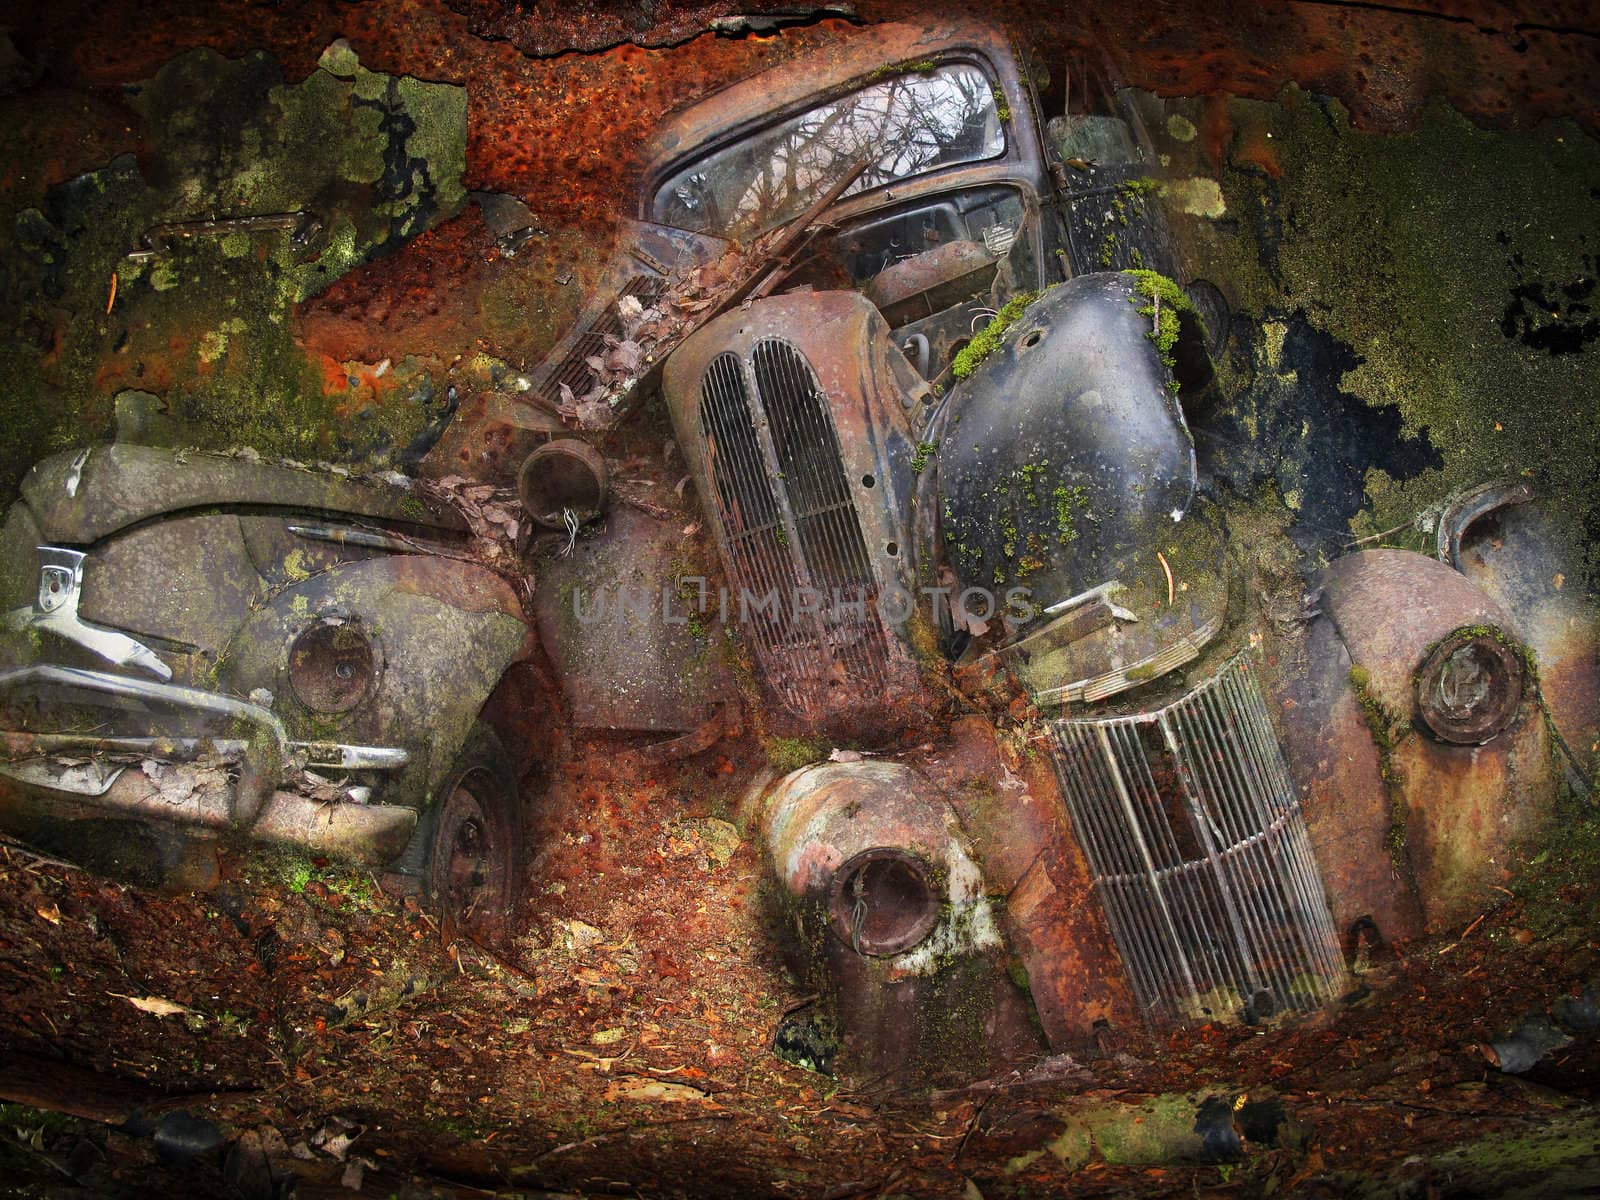 Once upon a time there were some automobiles. More of my photos worked together to underline time and decay. From the series scrap in the wood.